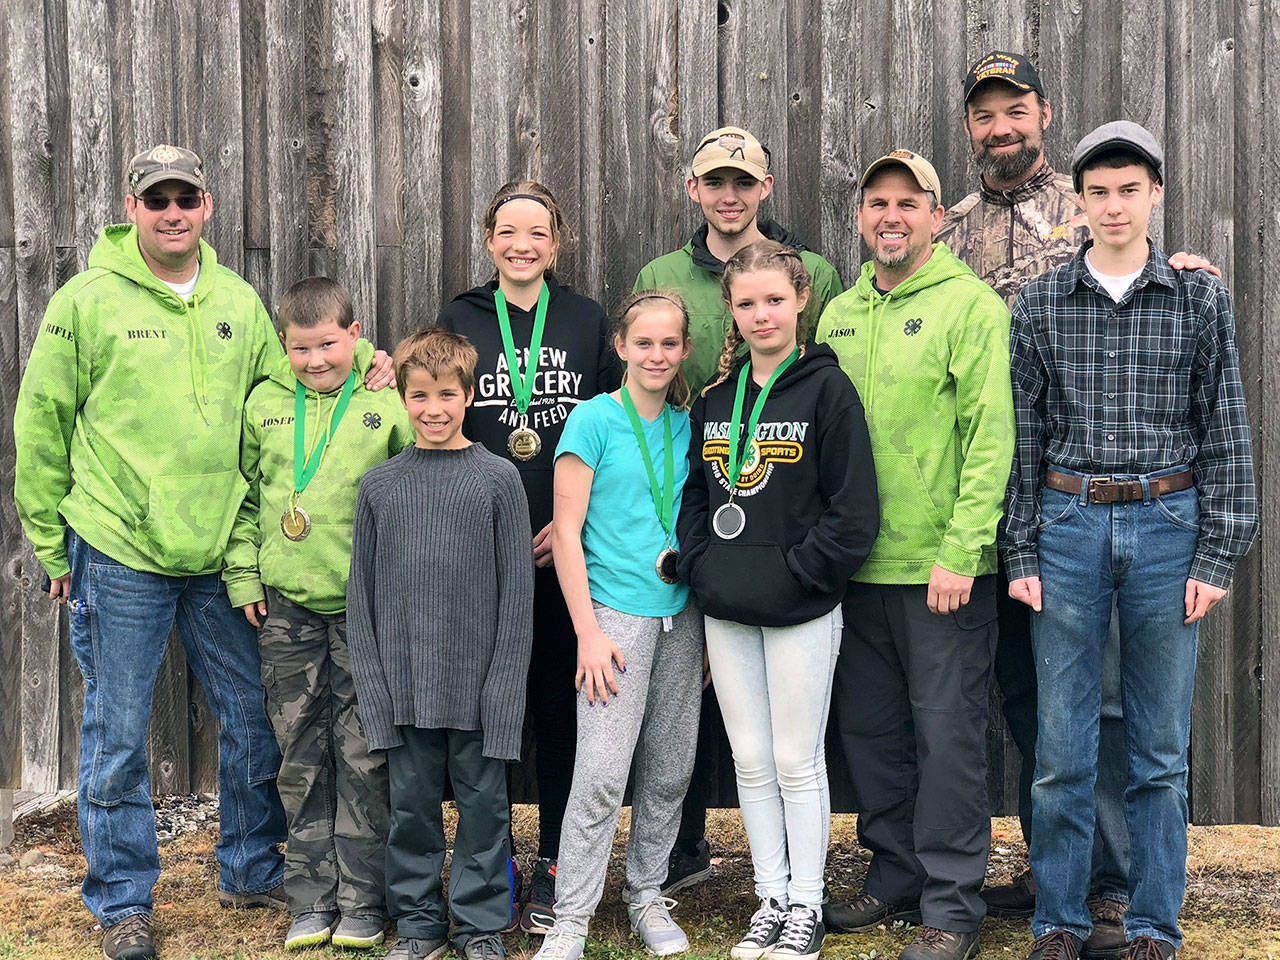 From left, front row, Jay Geniesse, Miriam Graves, Jacklyn Minnoch, Coach Jason Minnoch, Phillip Powers; and from left, back row, Coach Brent Maggard, Joseph Maggard, Bailey Geniesse, Aaron Andrews, and Coach Seth Geniesse.